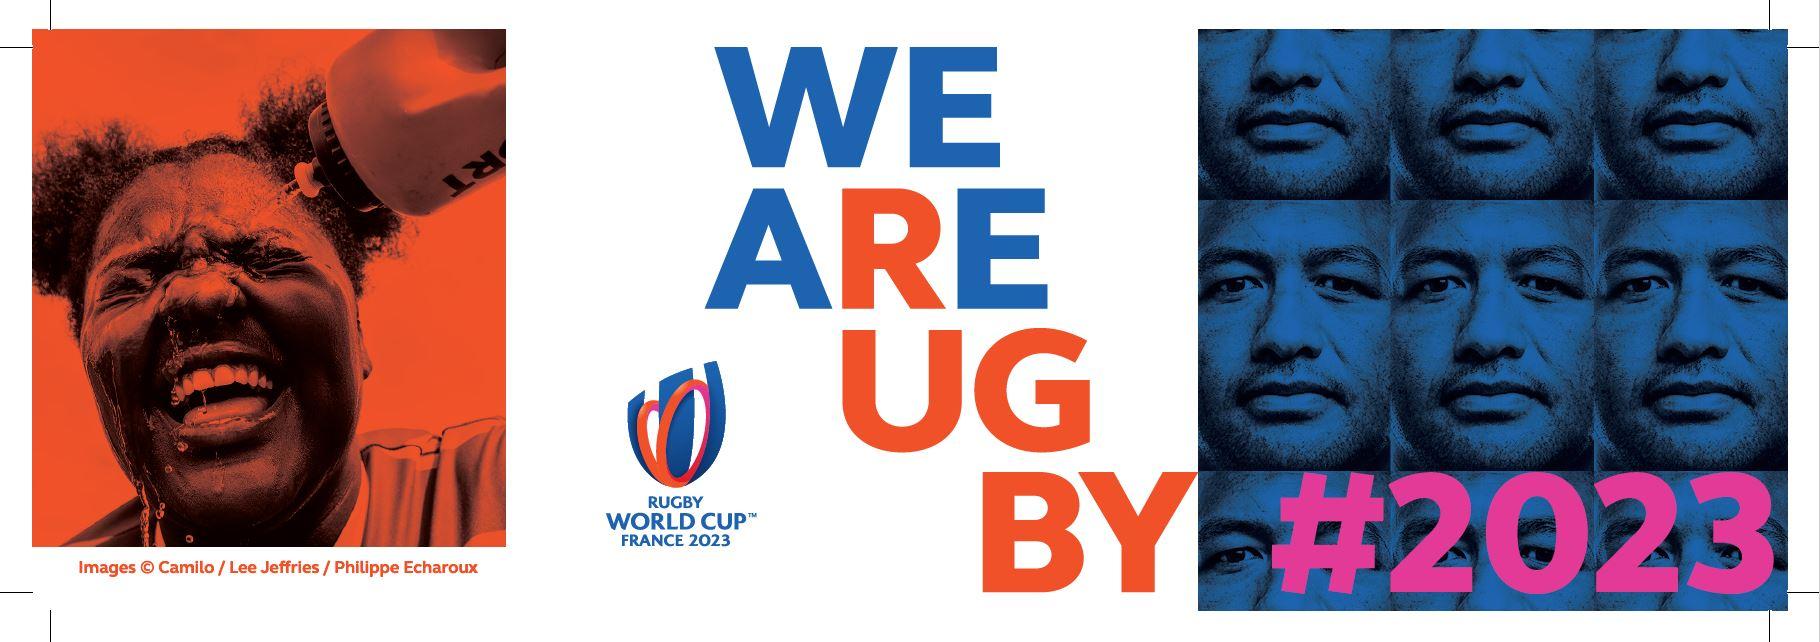 WE ARE RUGBY WE ARE ｜ Rugby World Cup 2023